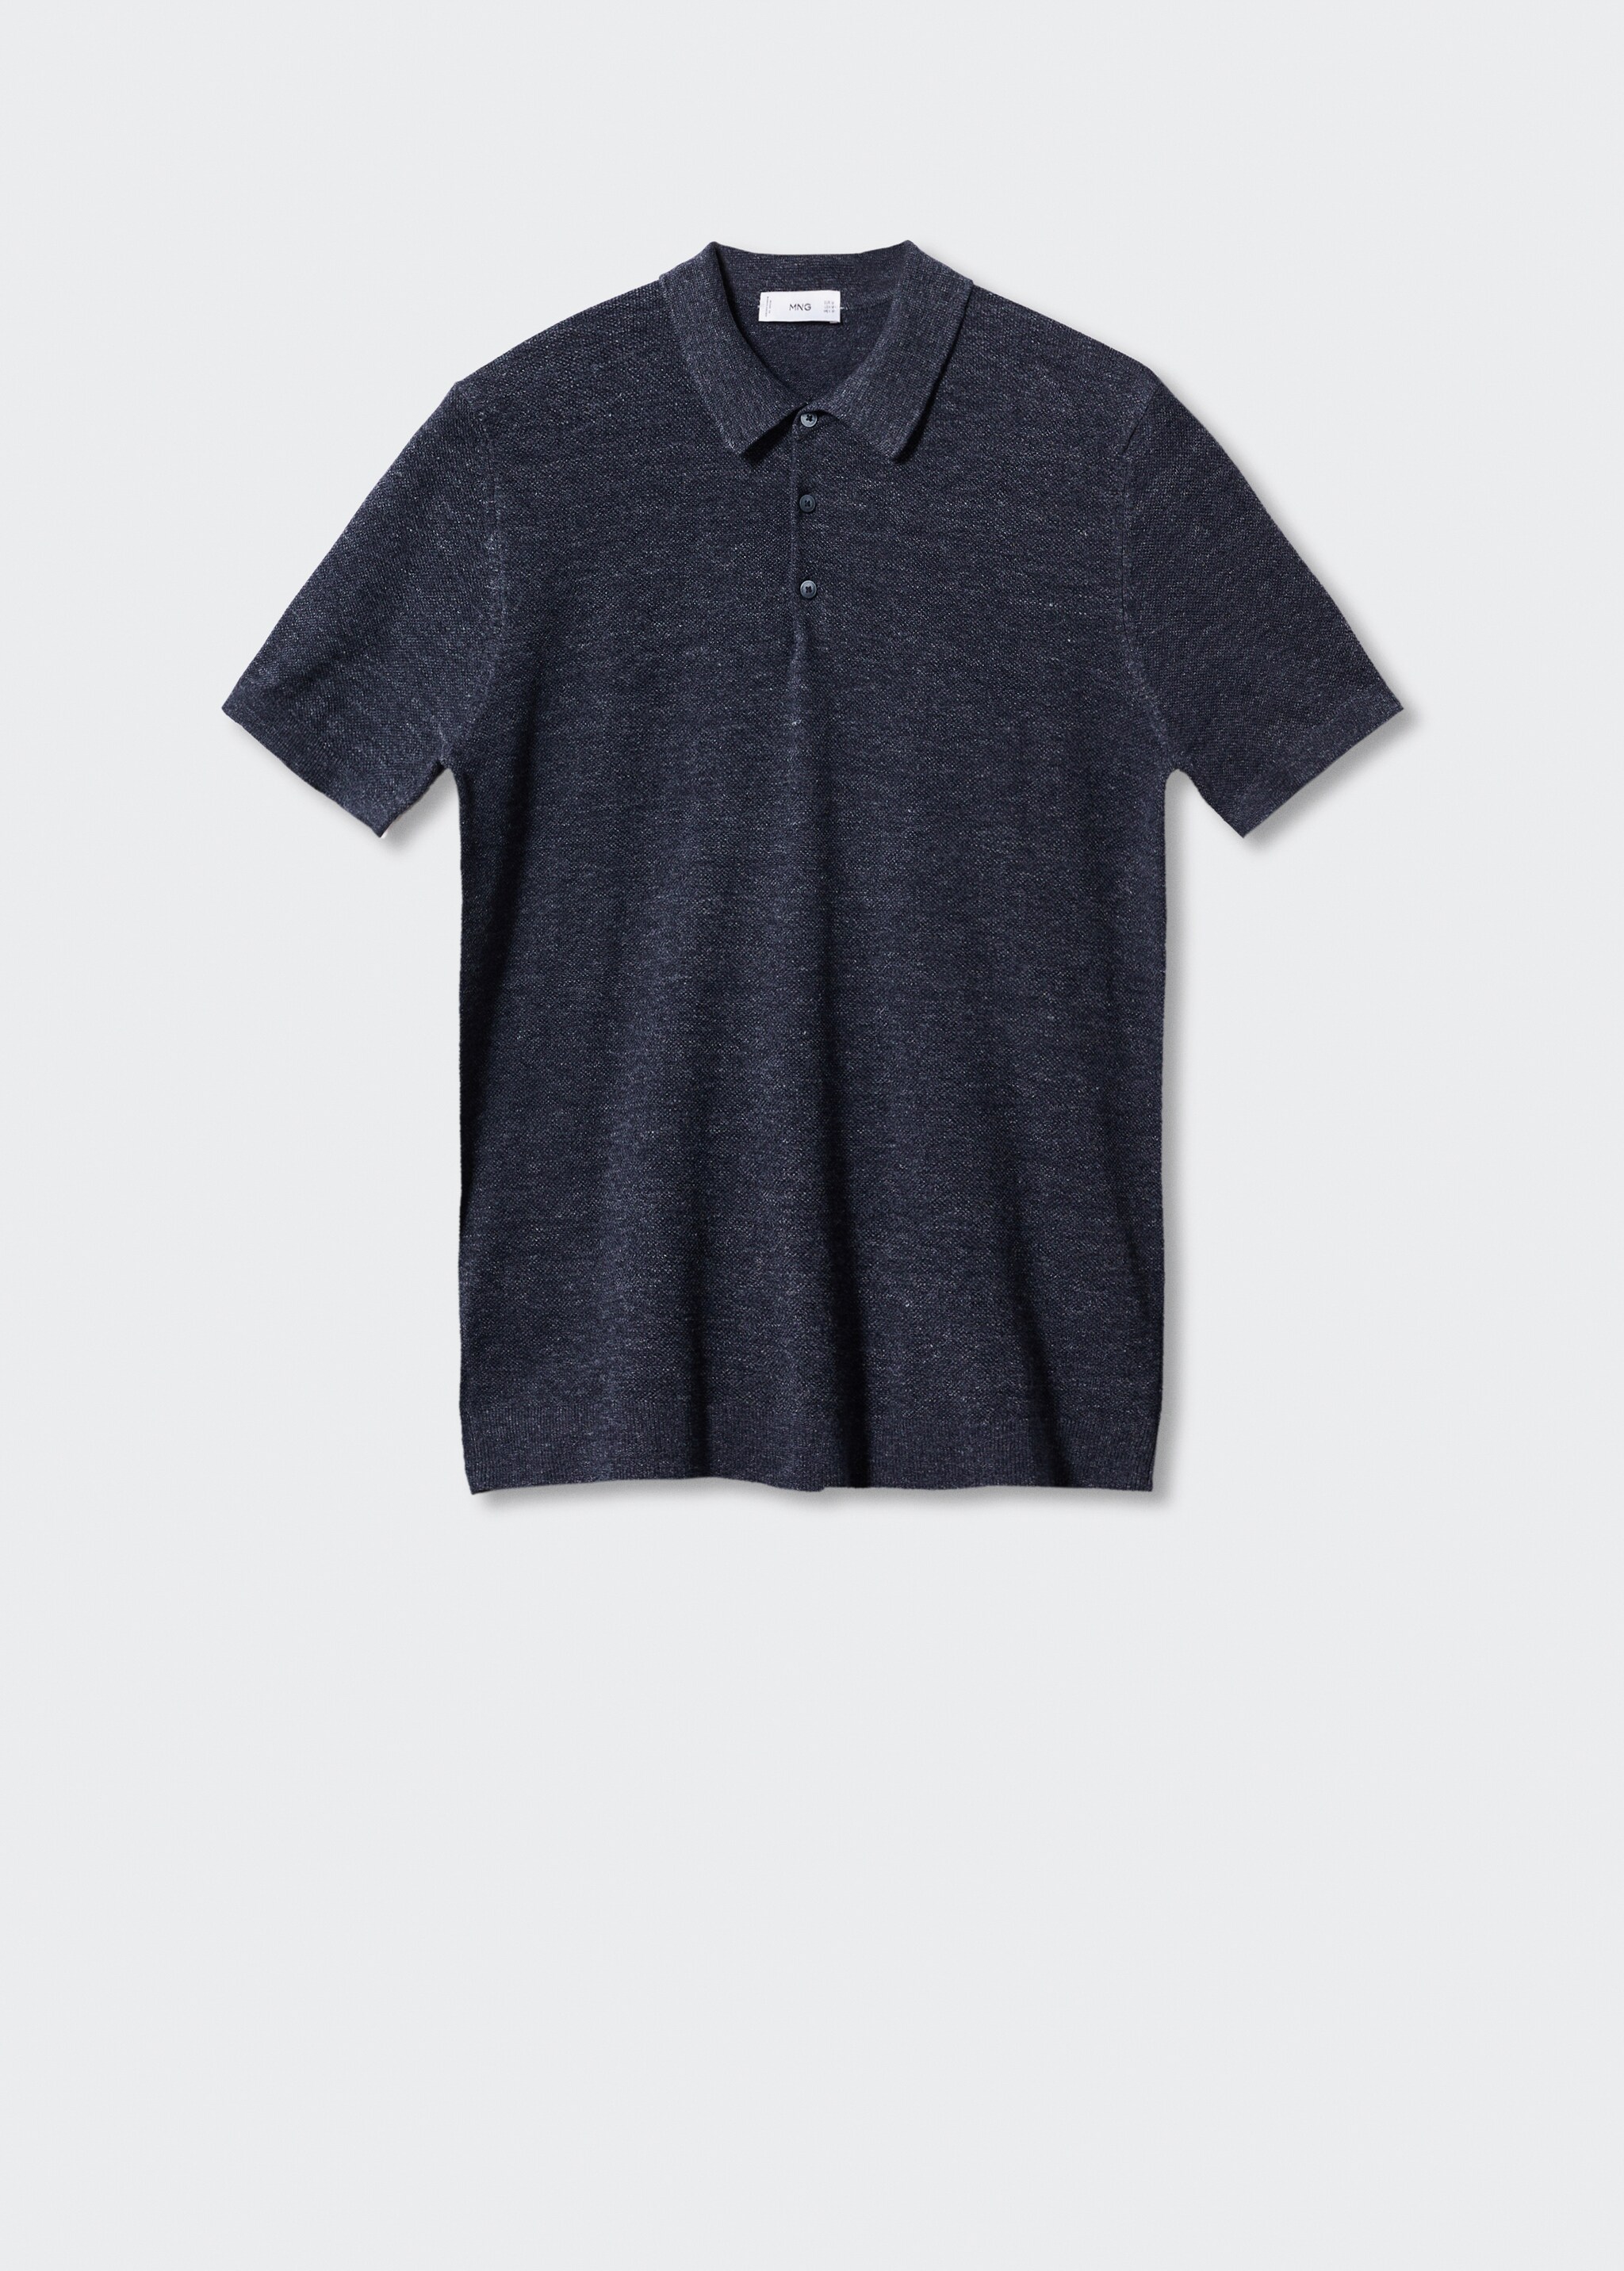 Knit cotton polo shirt - Article without model